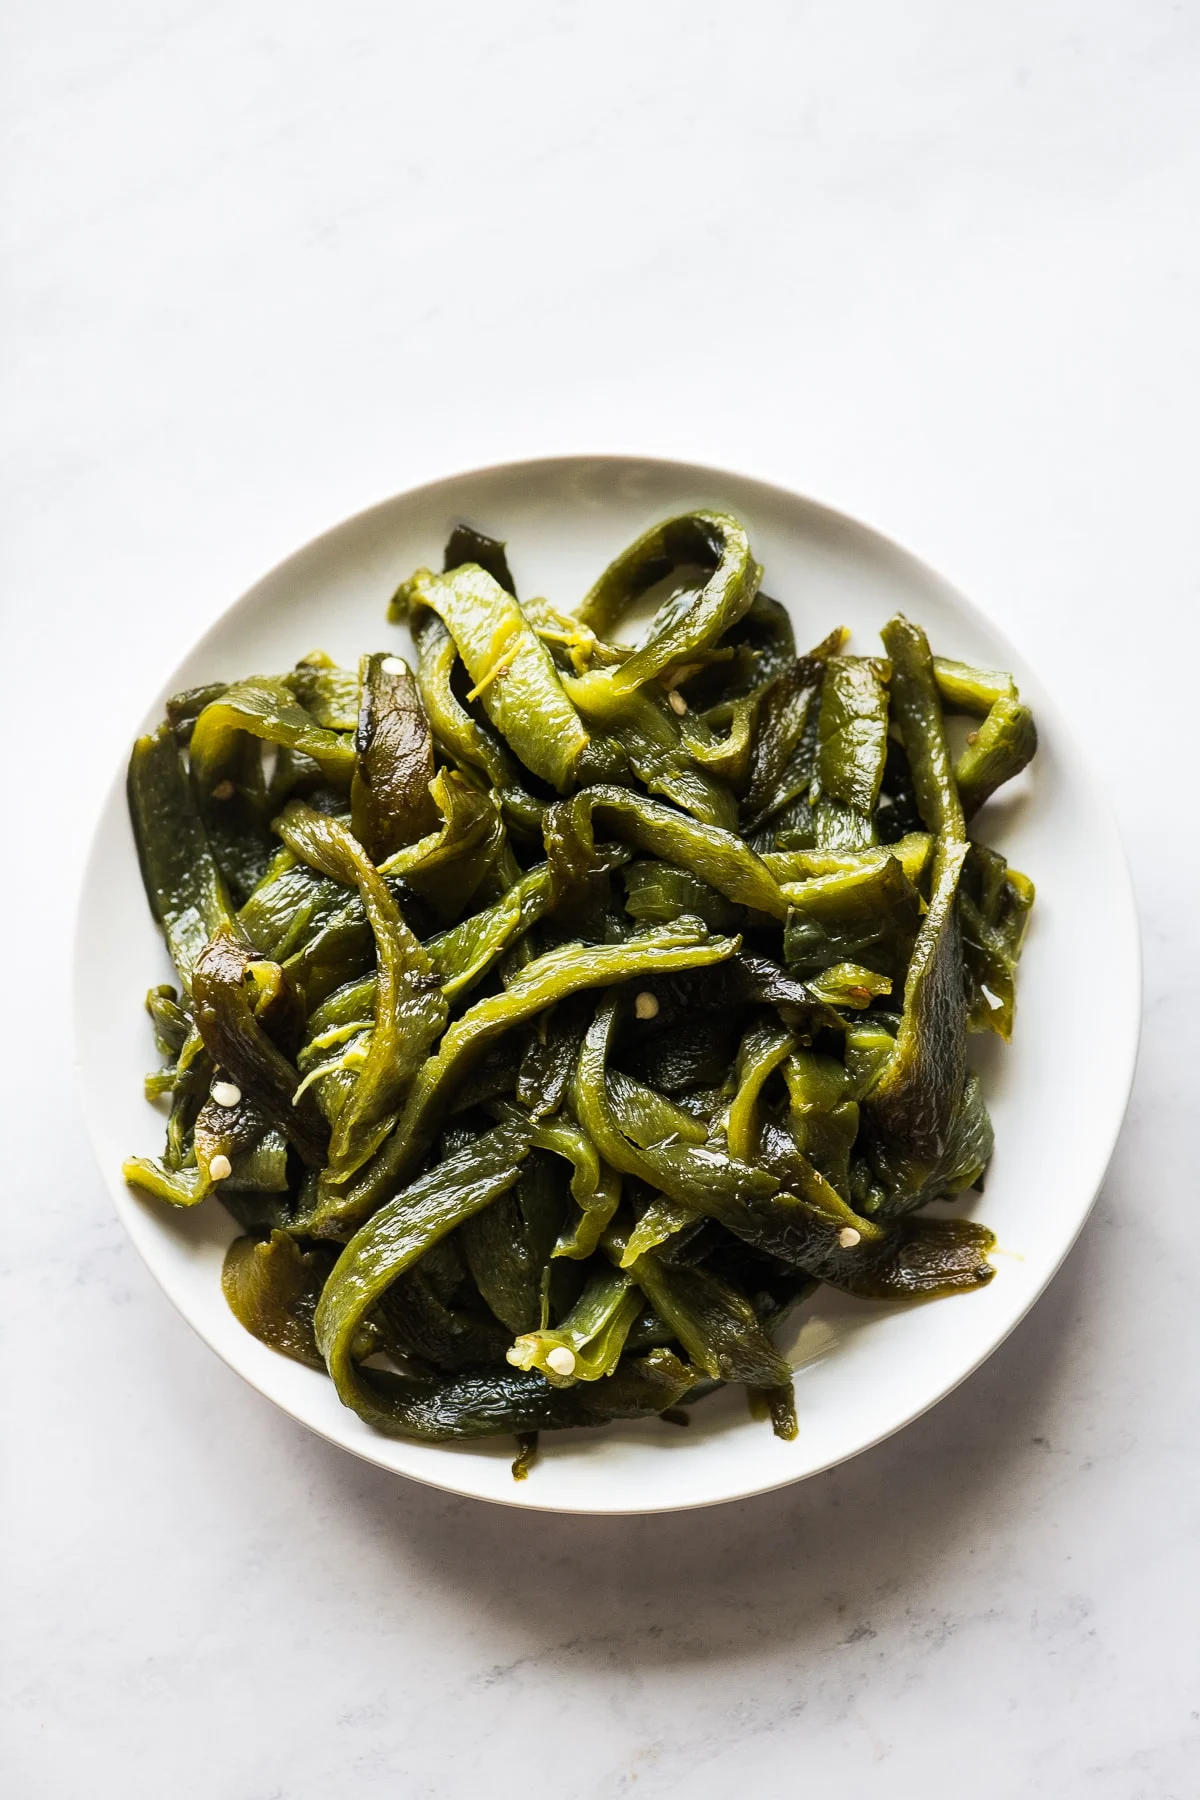 Slices of roasted poblano peppers (also knowns as rajas in spanish) on a plate.